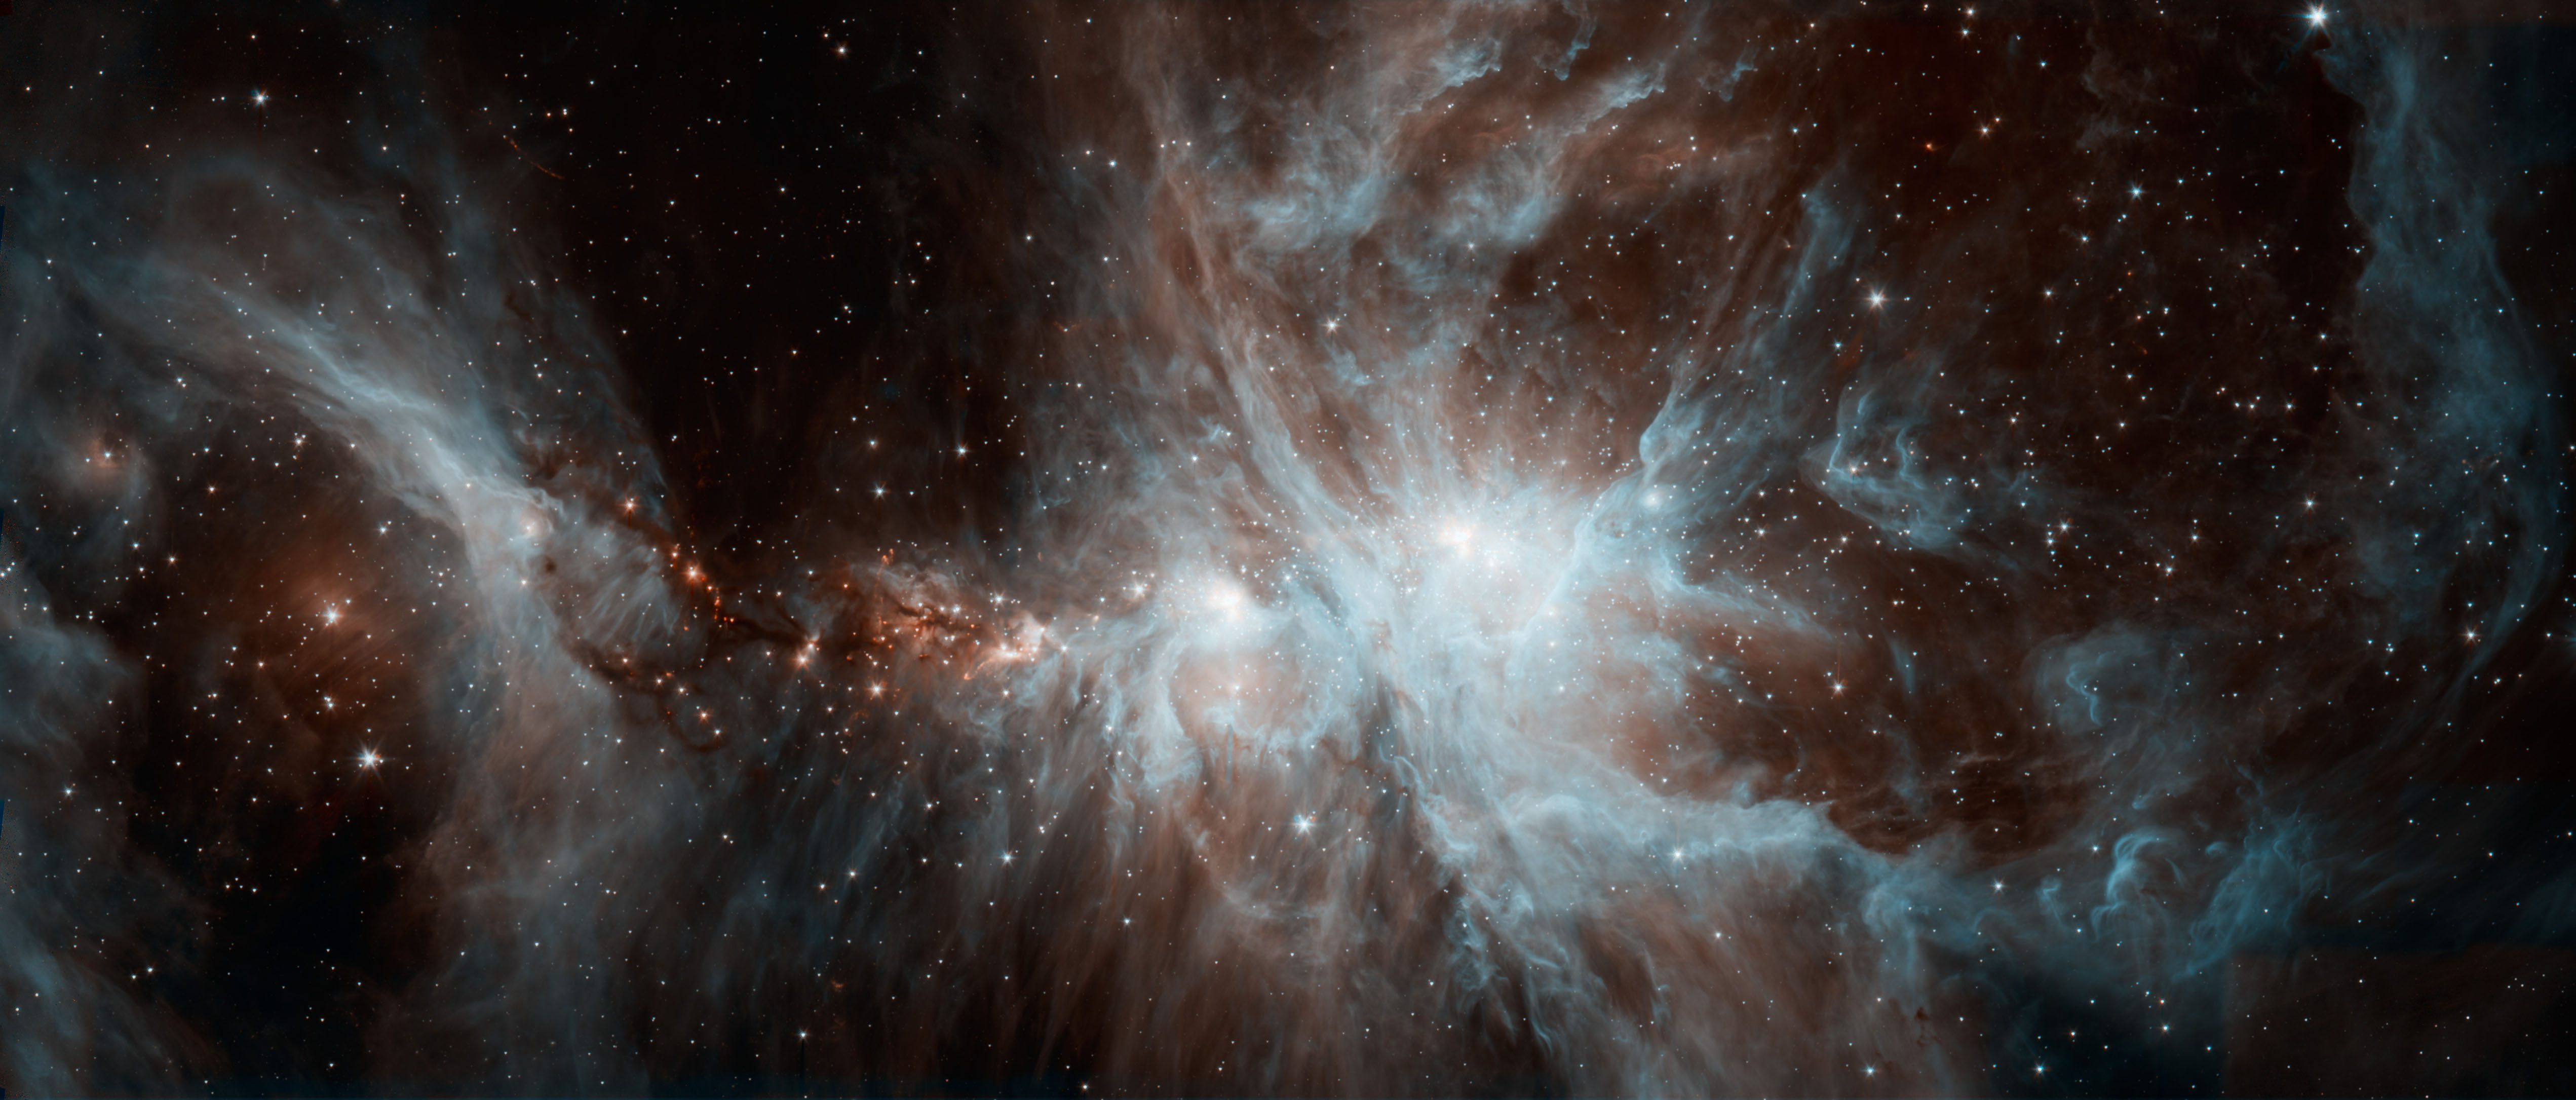 Spitzer's Orion